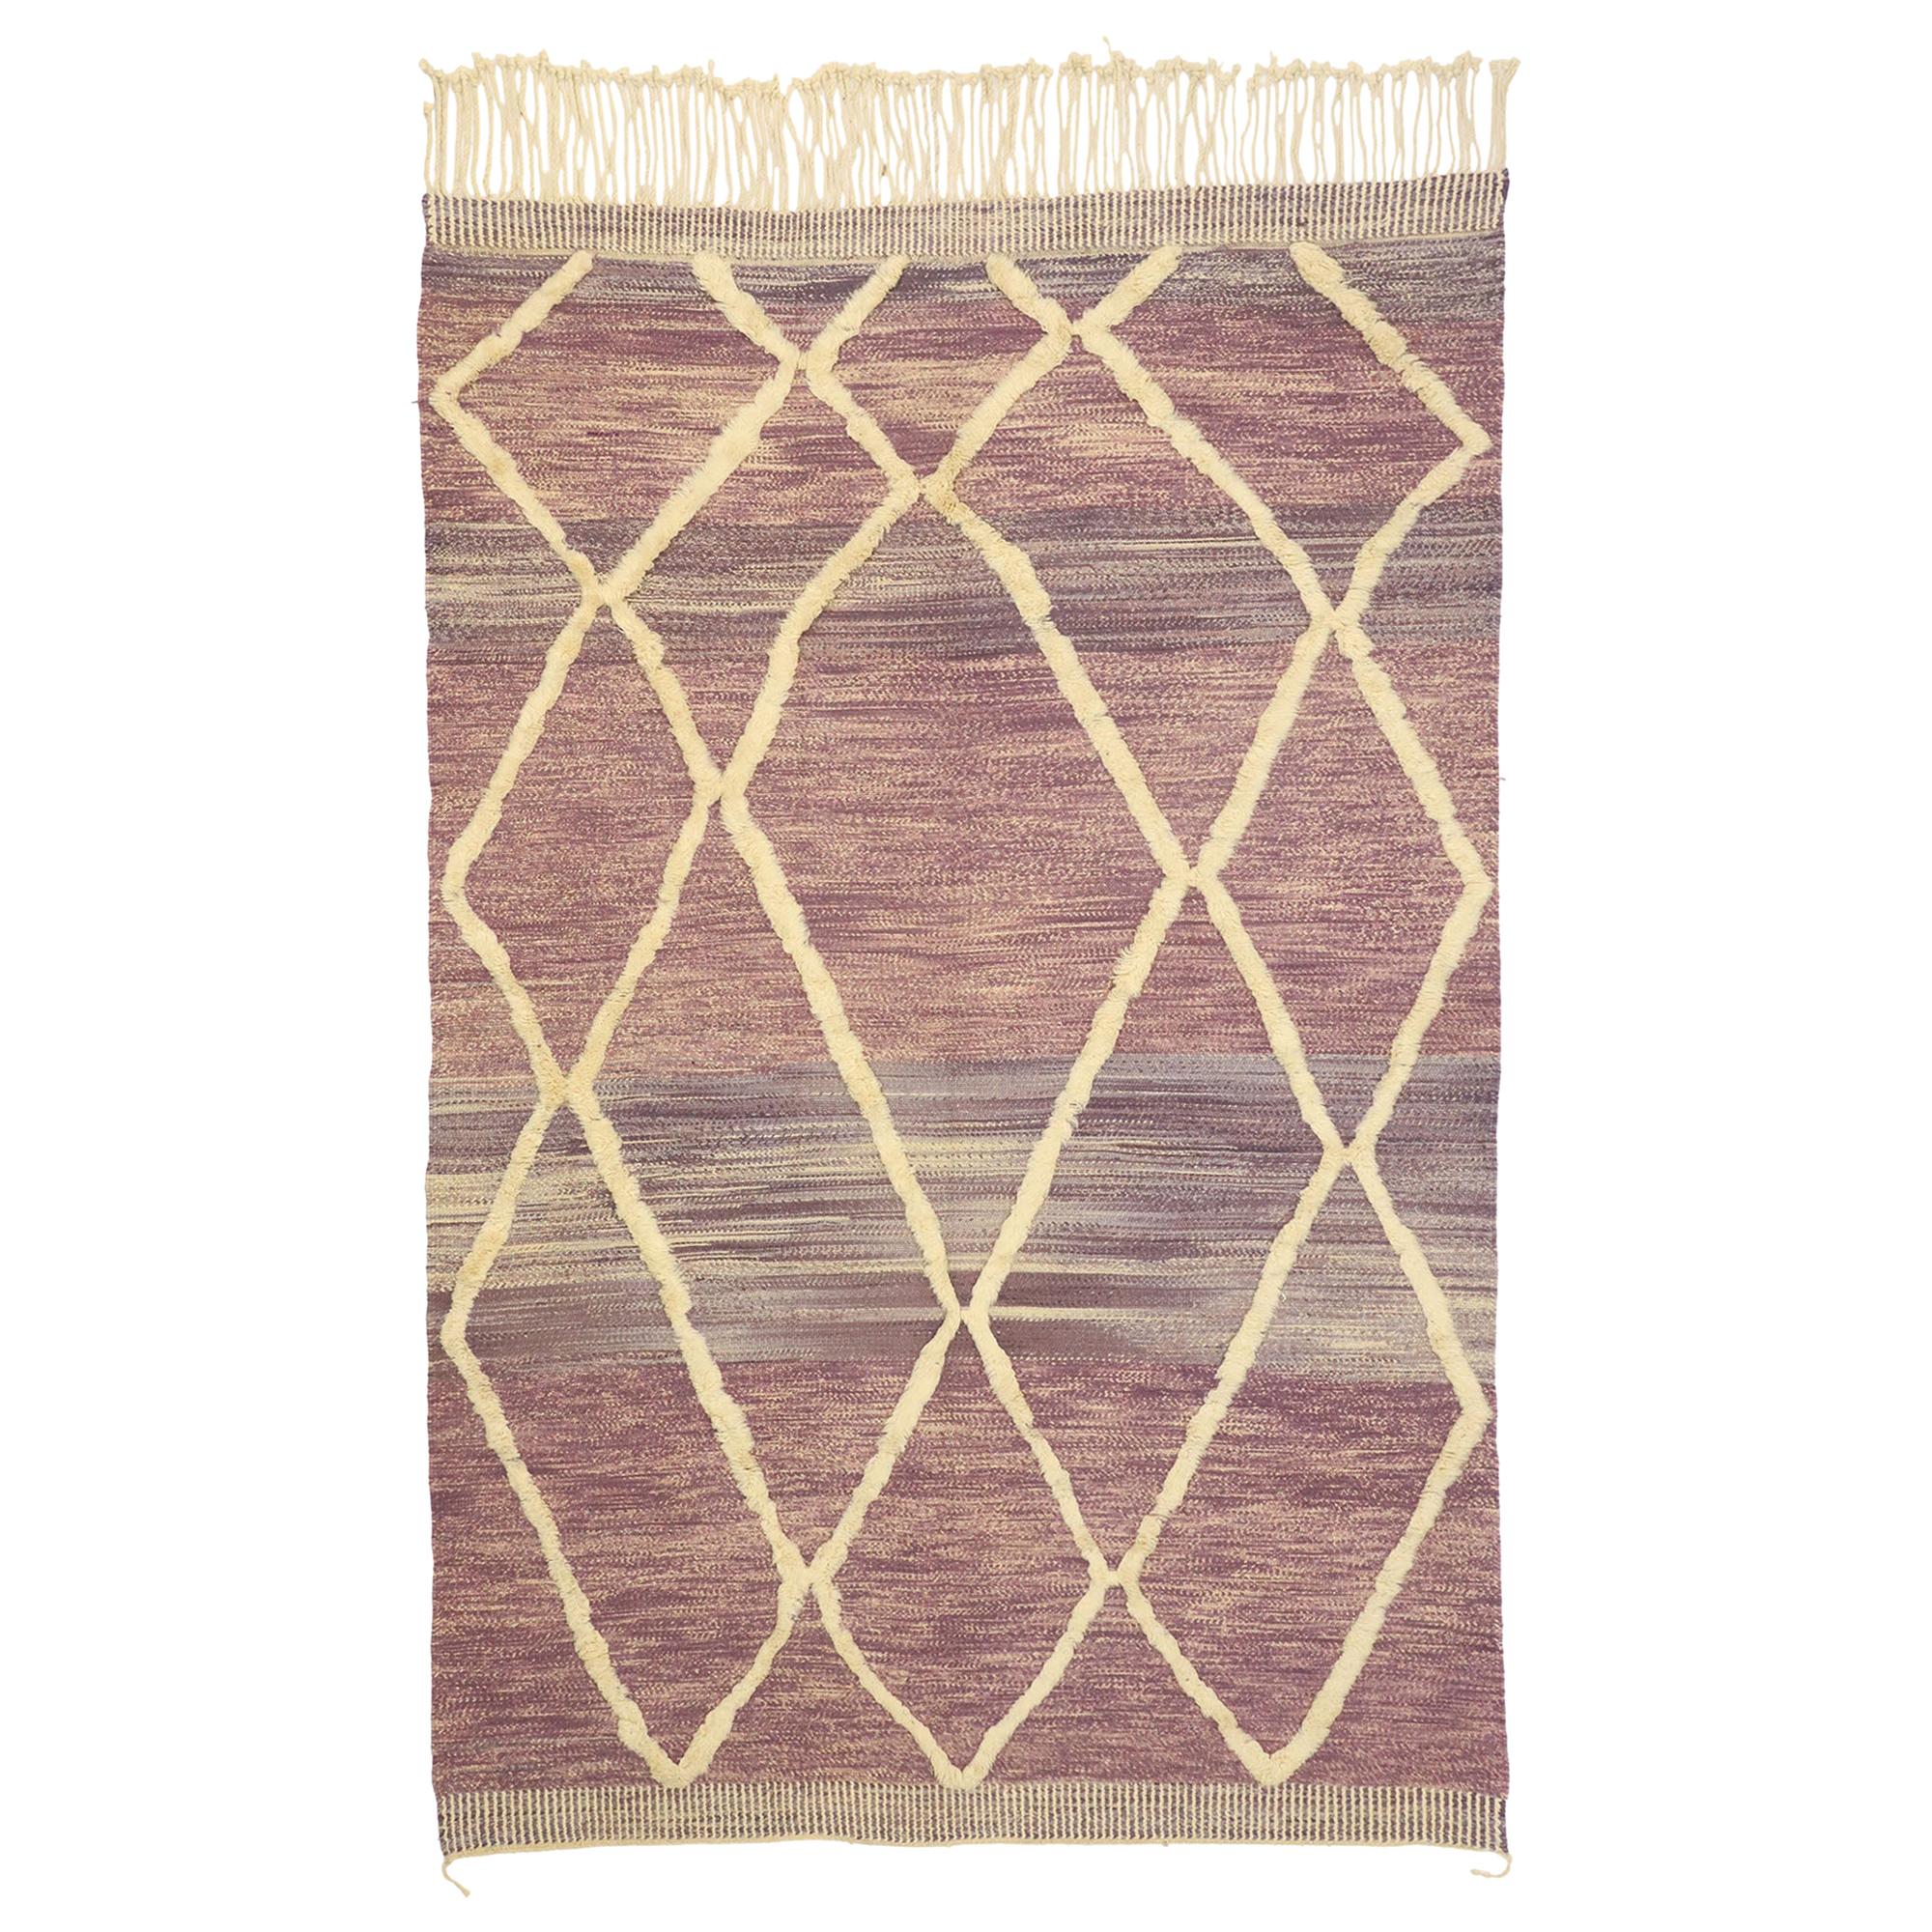 New Berber Moroccan Textured Rug with Raised Trellis Design For Sale